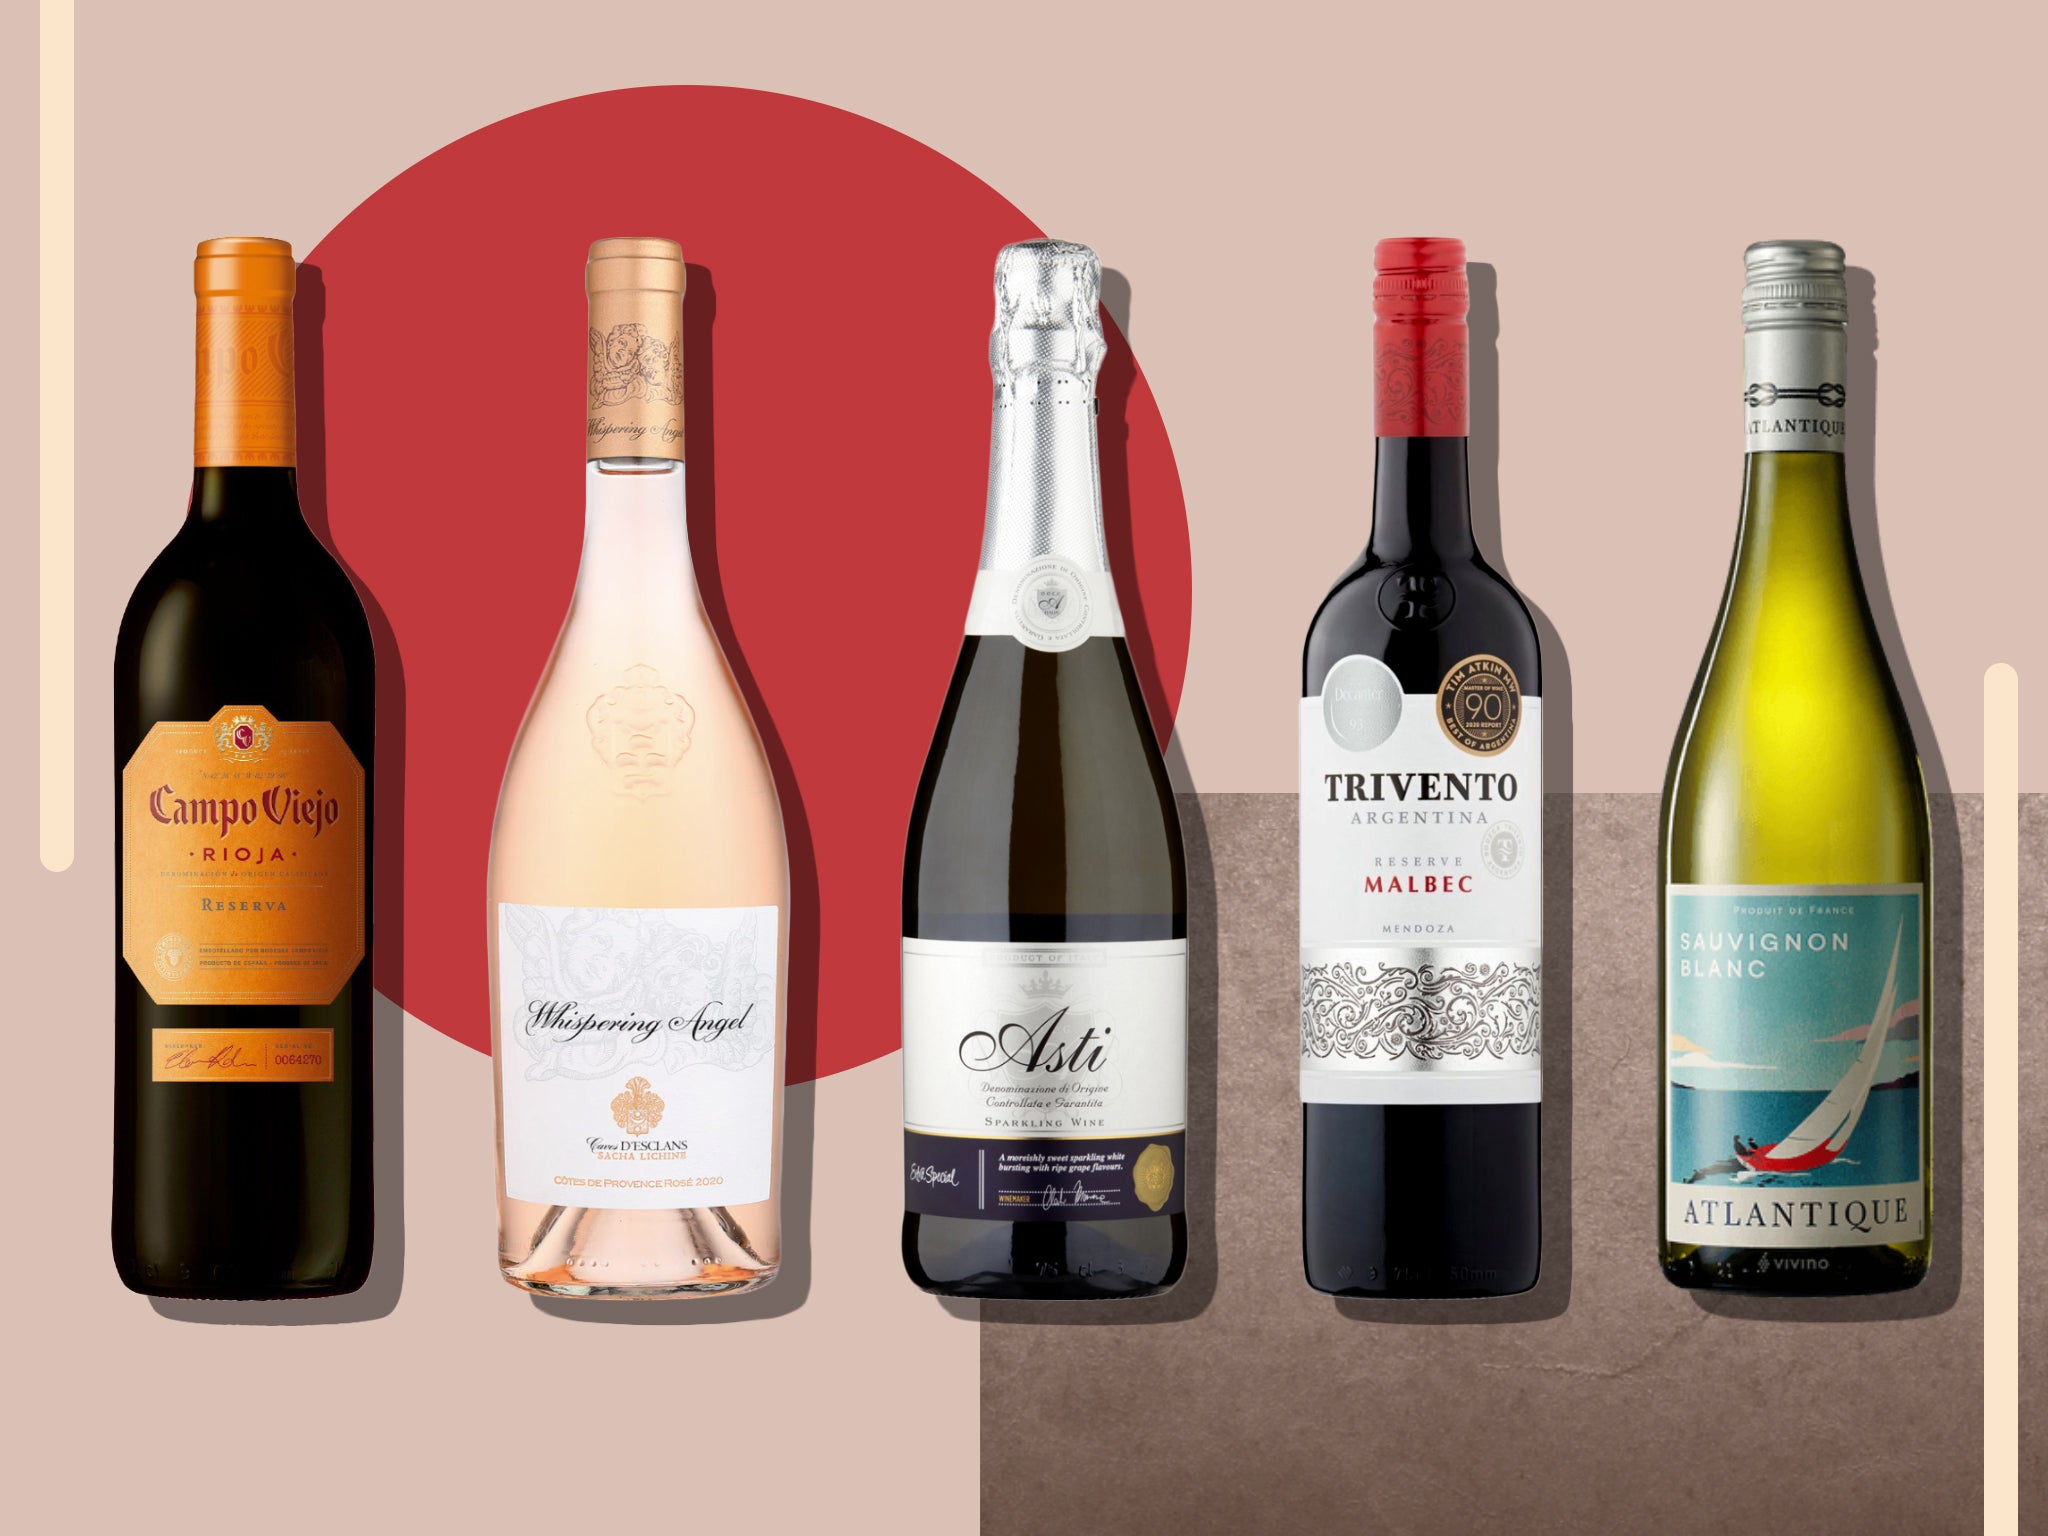 The best wine deals: Bargain bottles to sip and save on